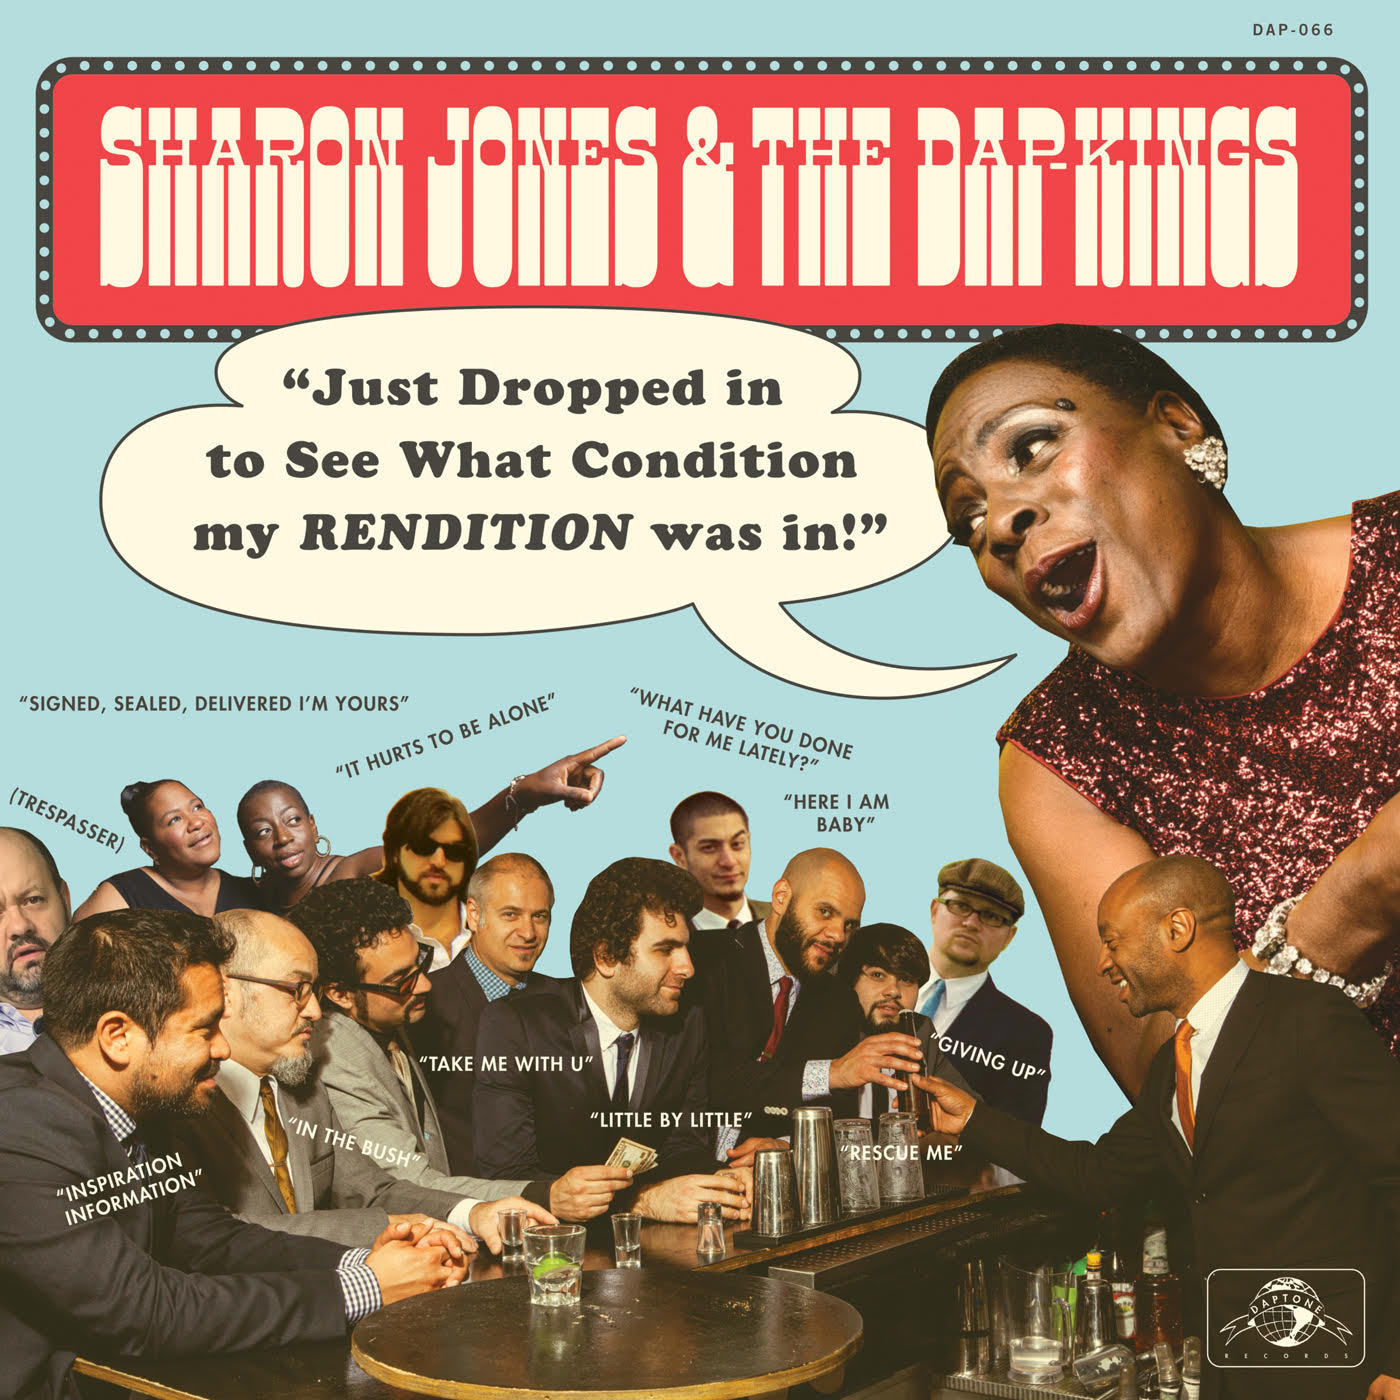 Sharon Jones & The Dap-kings - Just Dropped In (To See What Condition My Rendition Was In) (2020) [FLAC 24bit/88,2kHz]